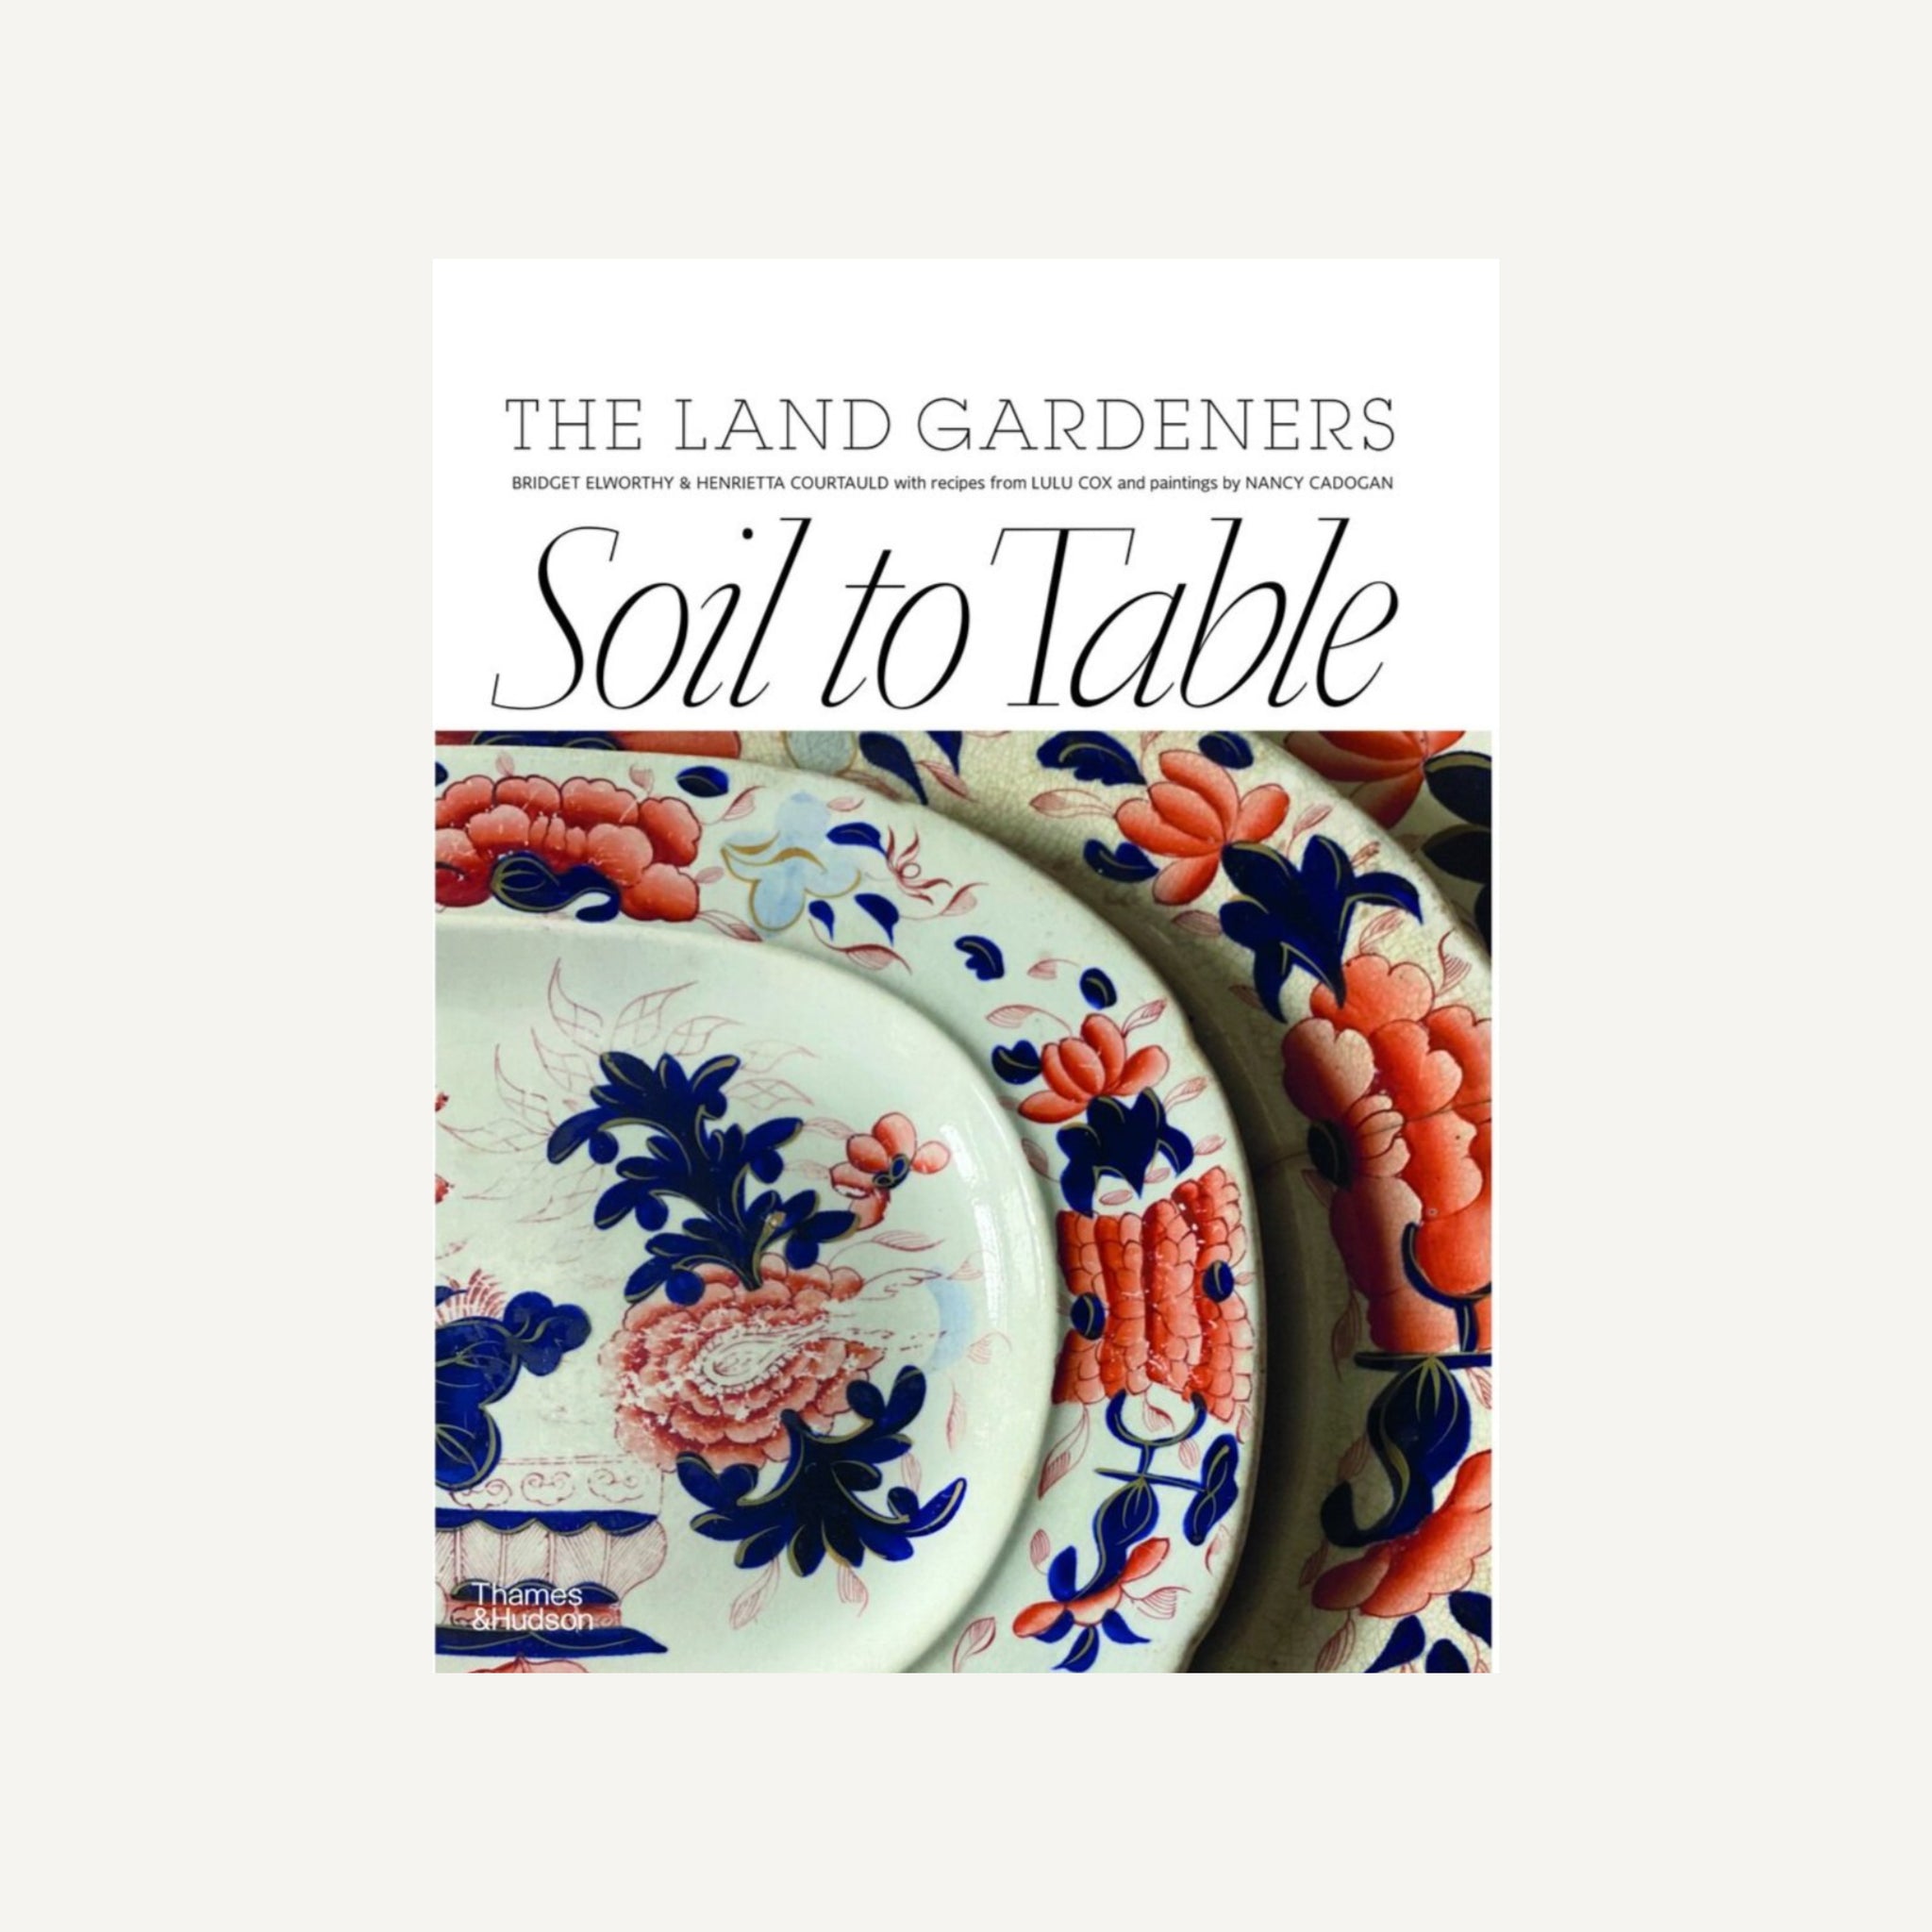 THE LAND GARDENERS: SOIL TO TABLE